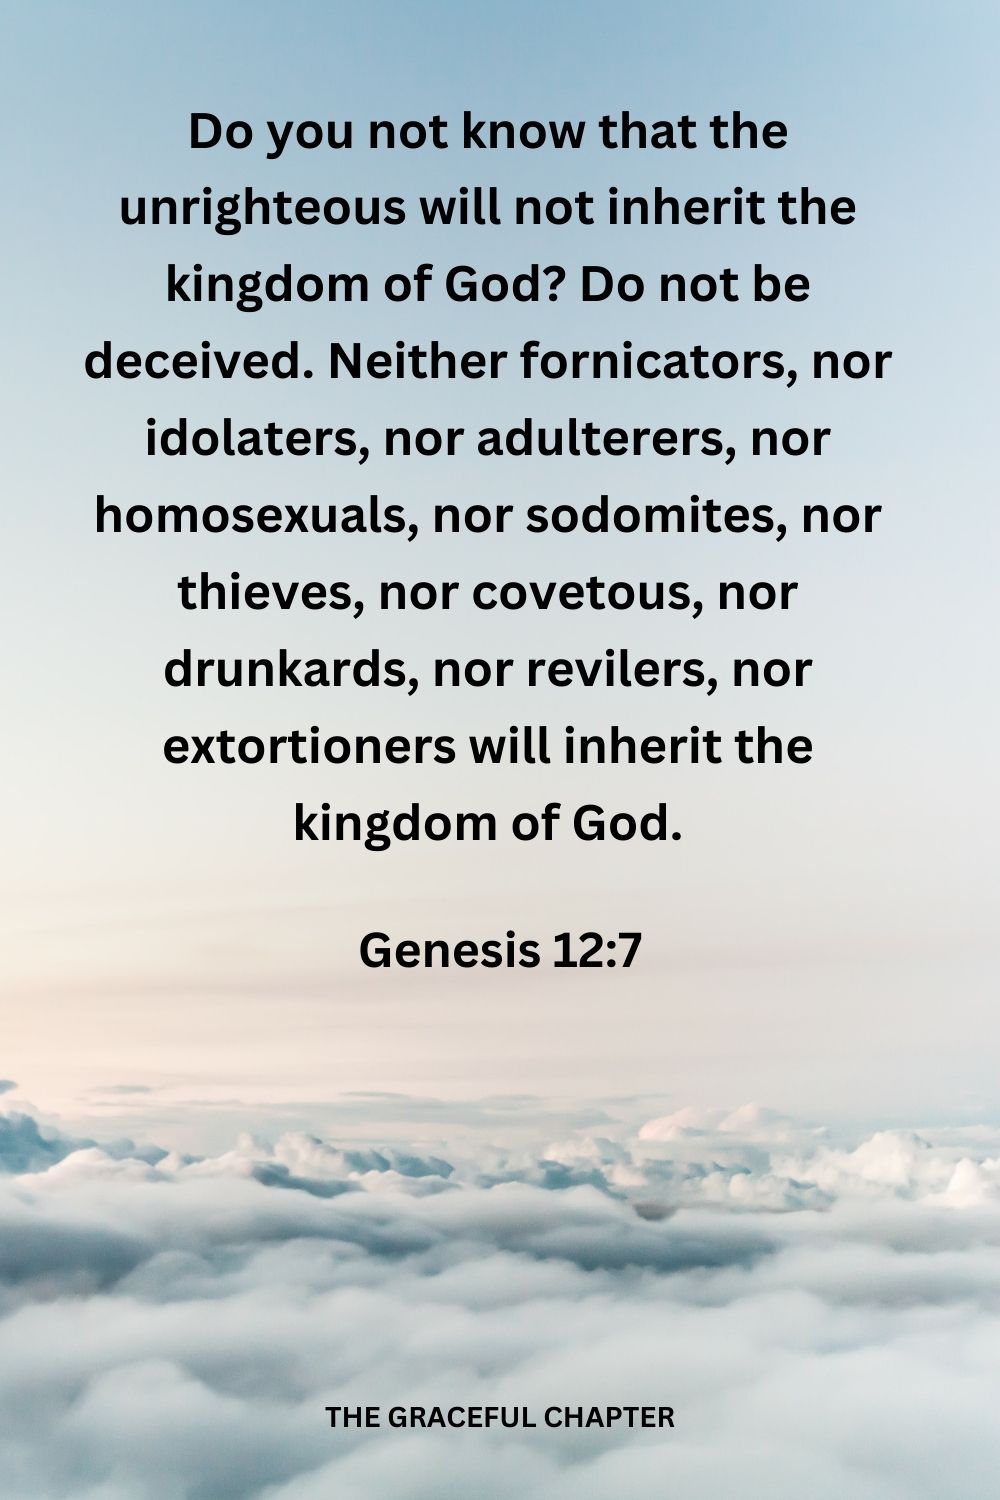 Do you not know that the unrighteous will not inherit the kingdom of God? Do not be deceived. Neither fornicators, nor idolaters, nor adulterers,  
nor homosexuals, nor sodomites, nor thieves, nor covetous, nor drunkards, nor revilers, nor extortioners will inherit the kingdom of God. 1 Corinthians 6:9-10